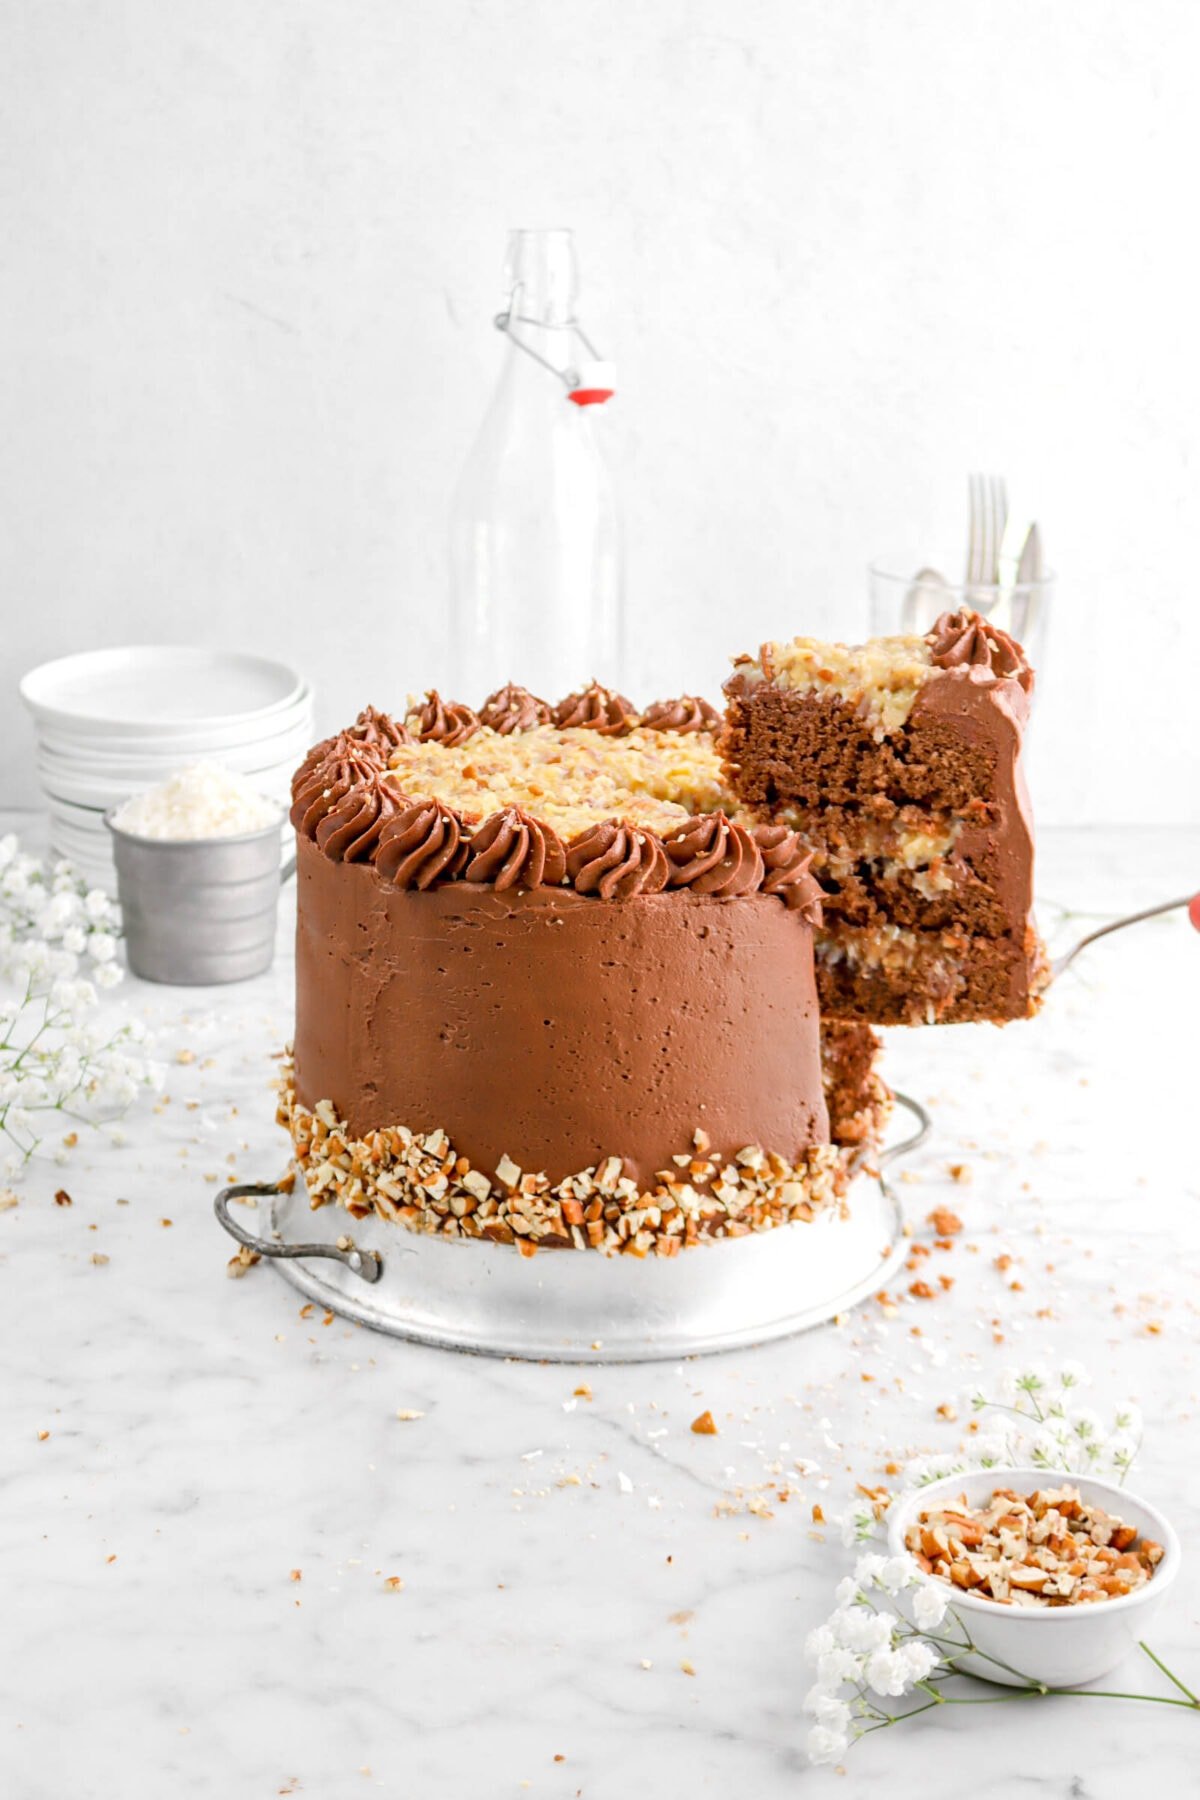 slice of german chocolate cake being held by the cake with flowers around, a bowl of chopped pecans, a cup measure of shredded coconut, and stack of white plates